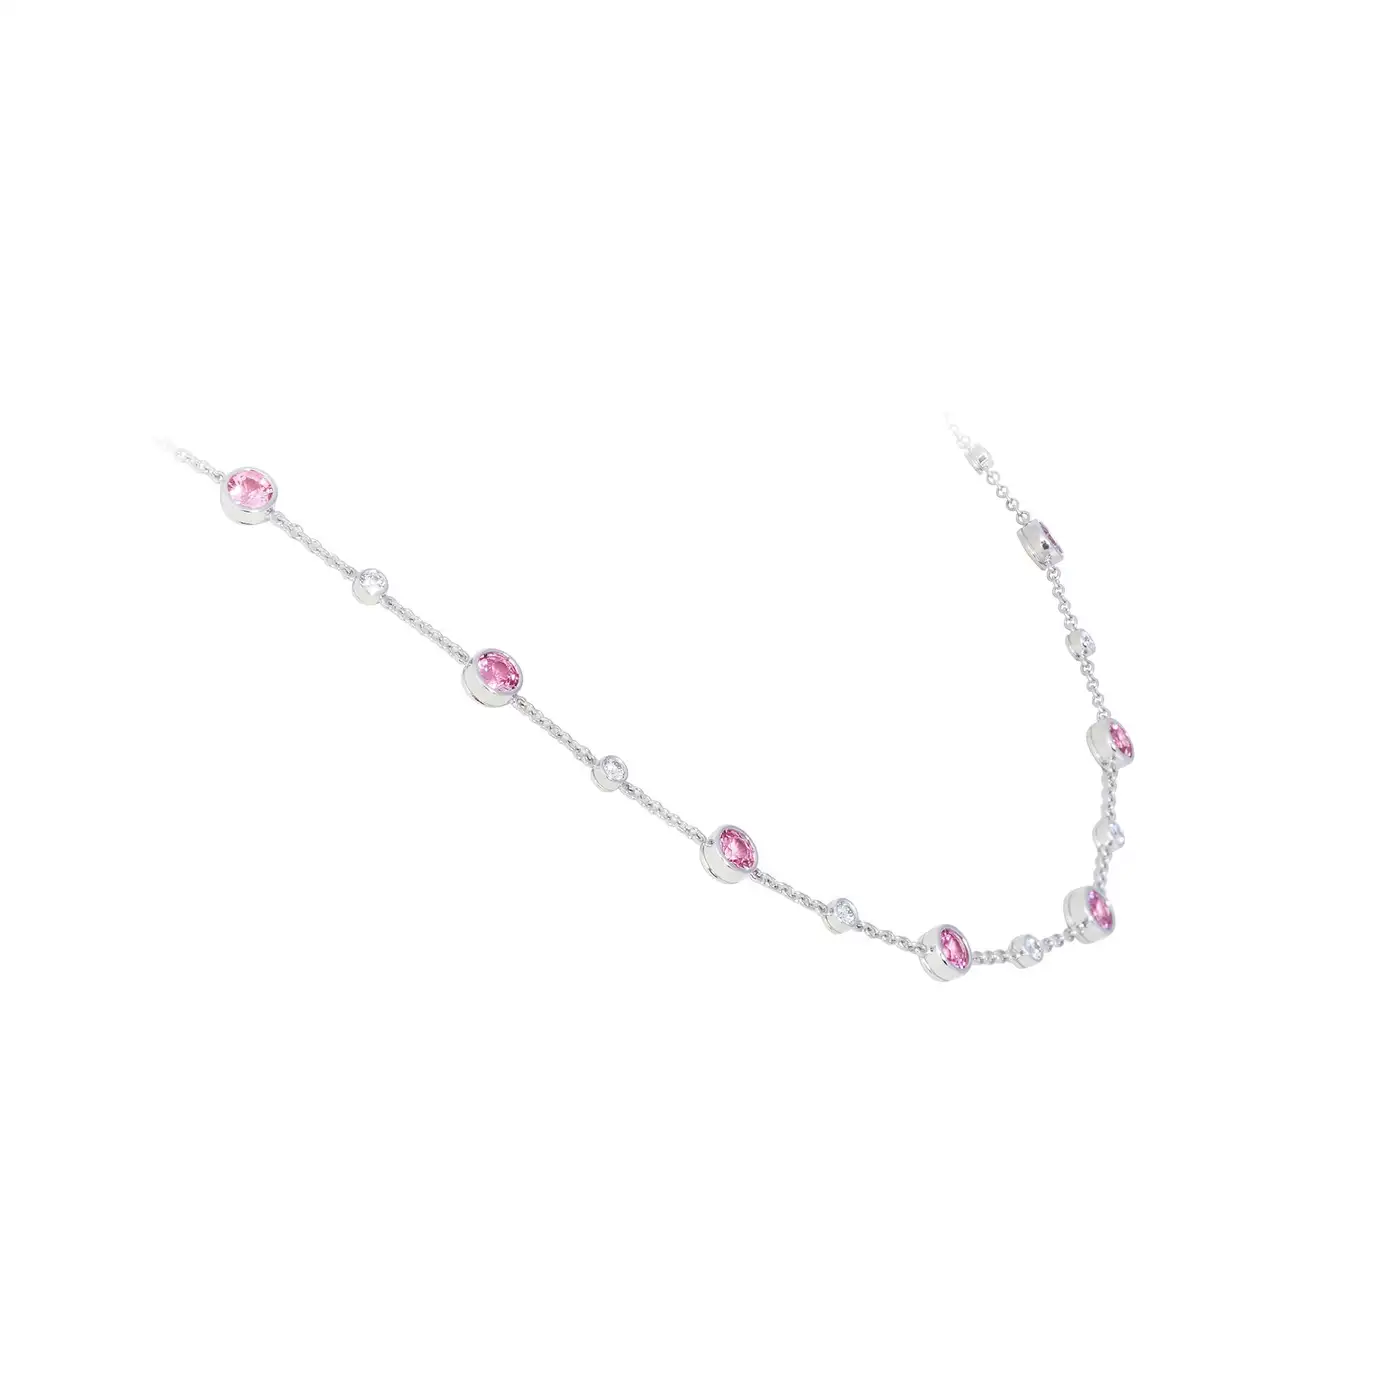 Tiffany-Swing-Pink-sapphire-and-Diamond-Necklace-Tiffany-Co-6.webp